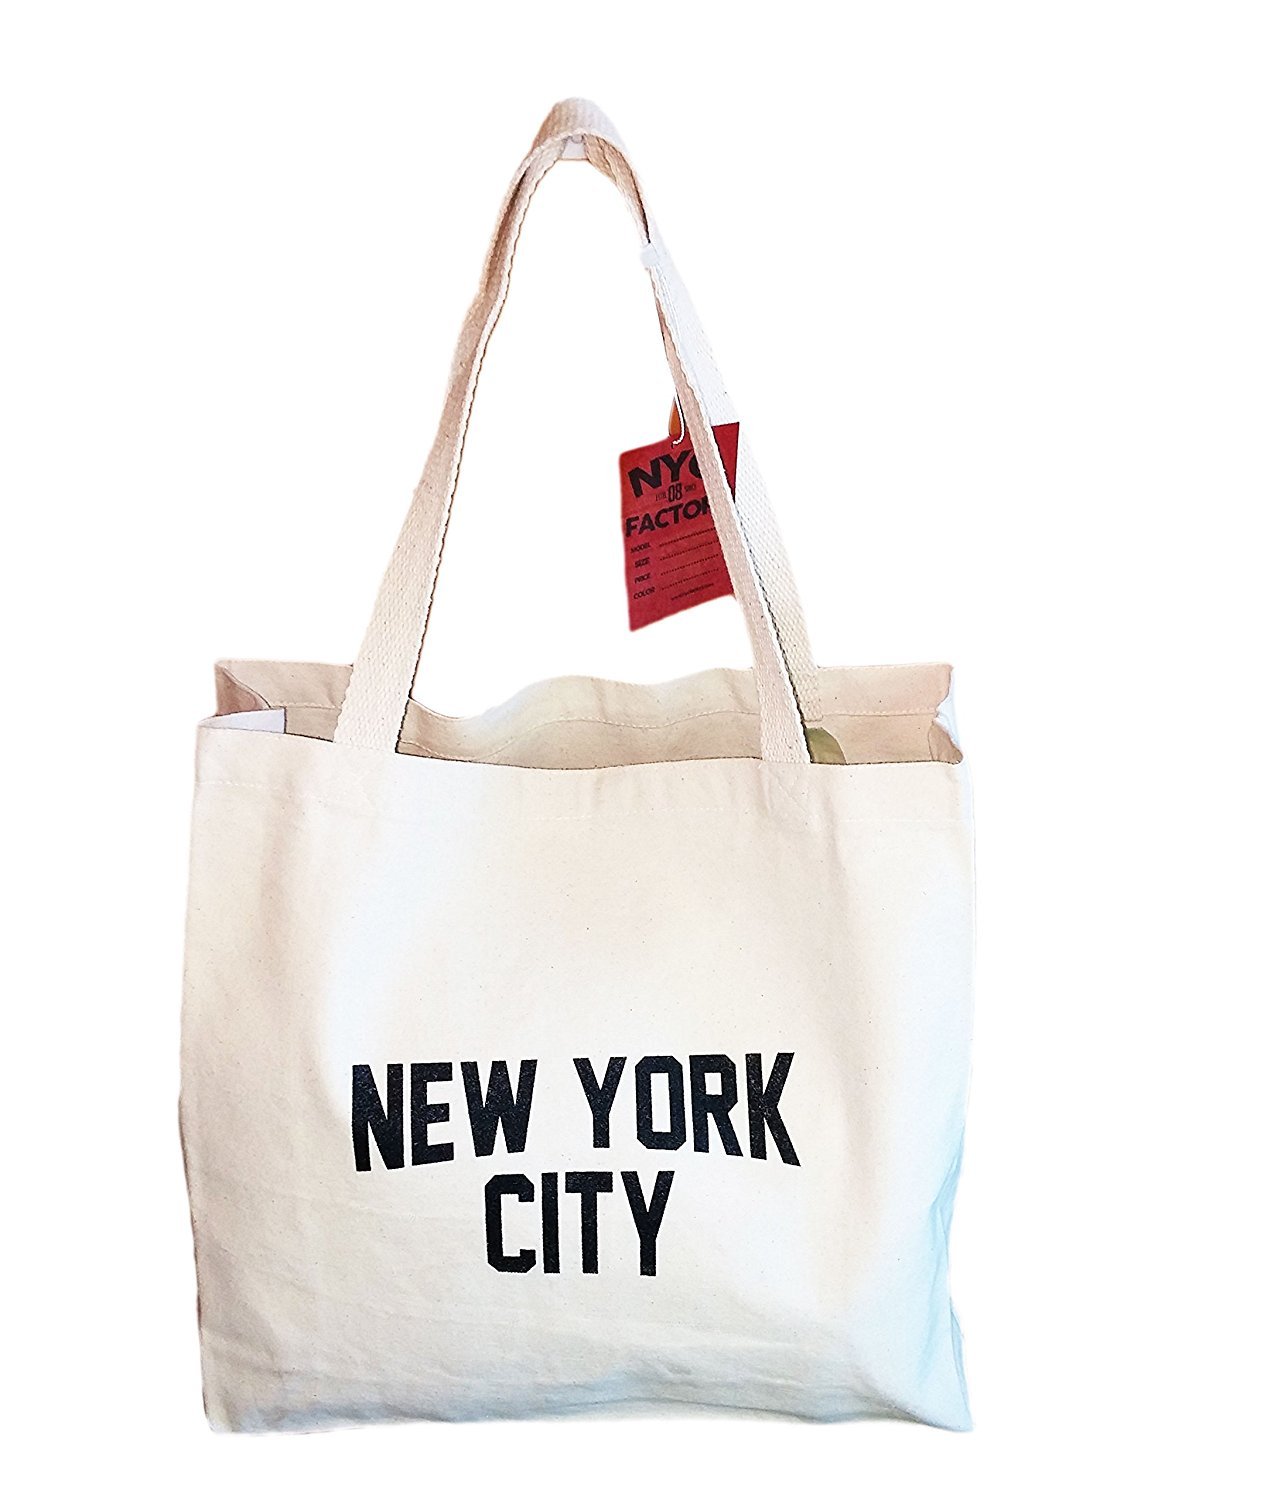 Gusseted New York City Tote Bag Lennon NYC Style Shopping Gym Beach | eBay